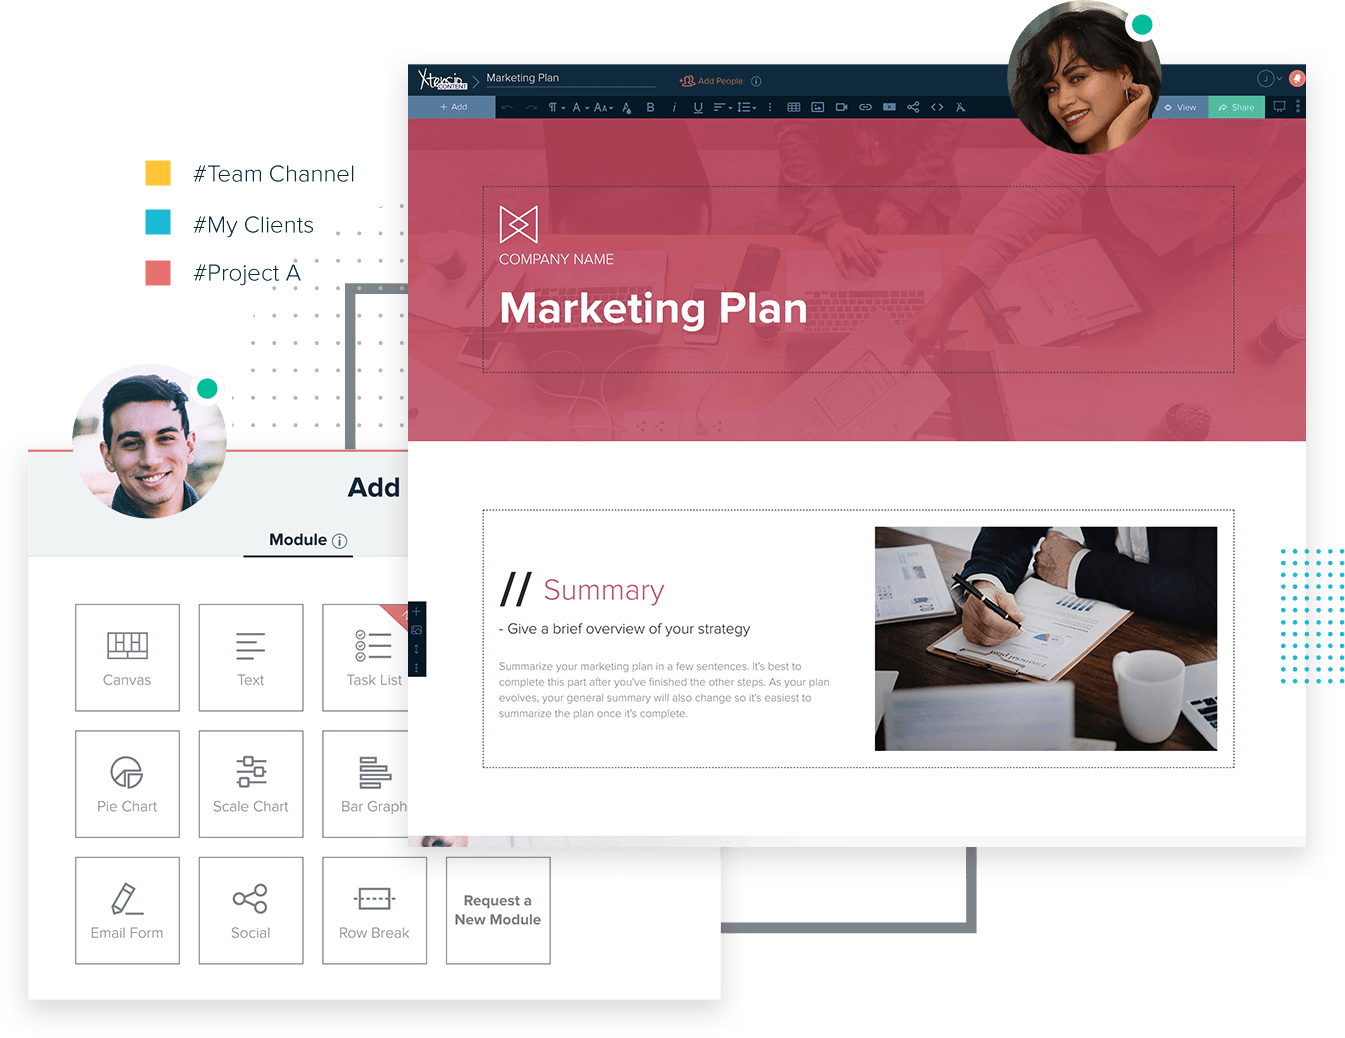 Xtensio´s Marketing Plan Template For Marketeers And Add New Module Among Other Features